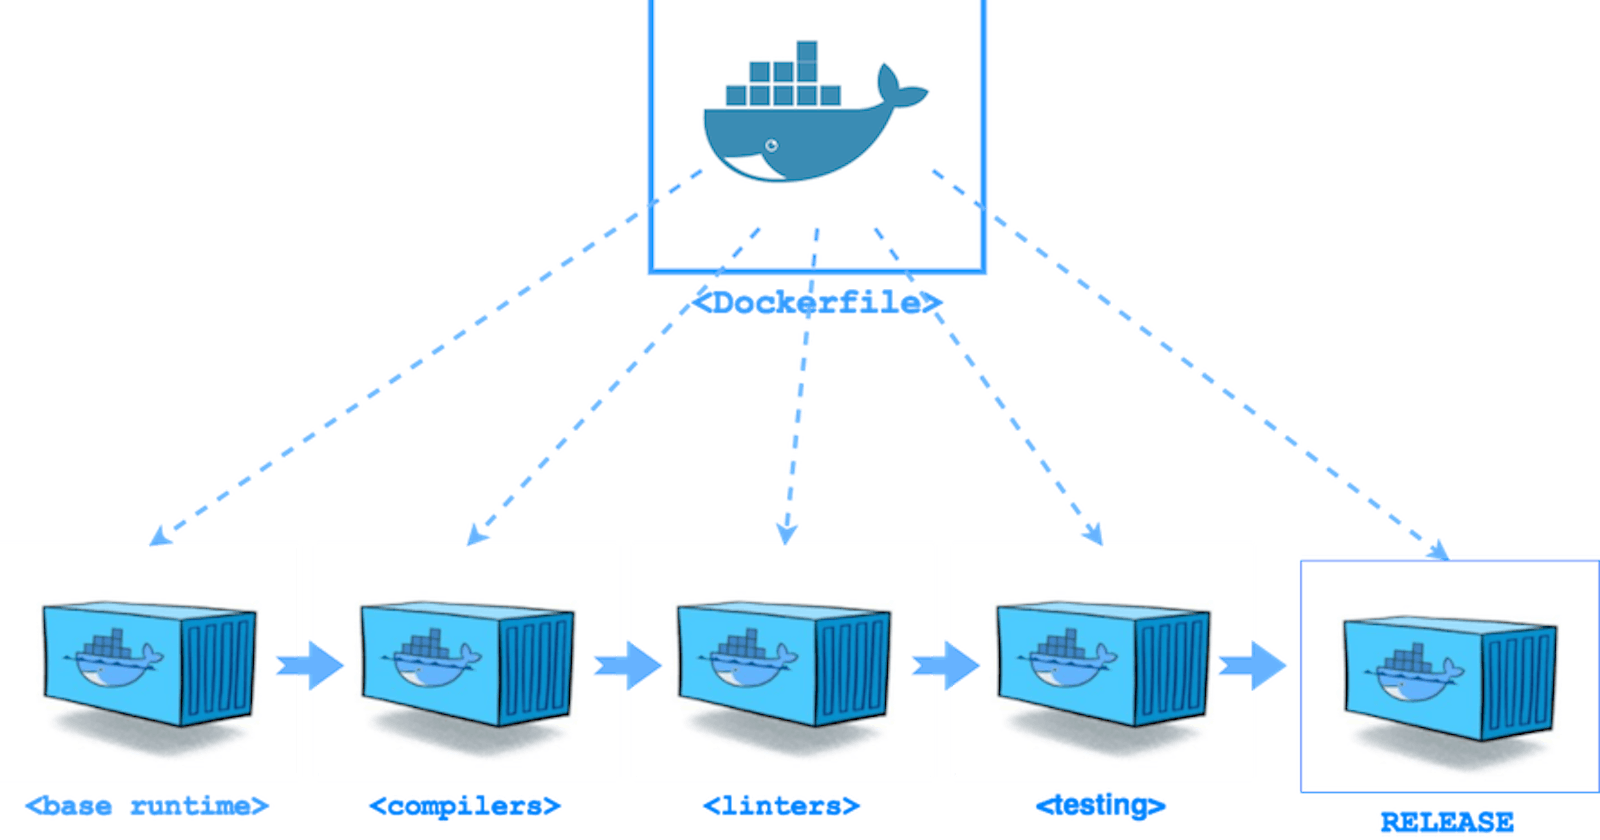 Containerizing Application with Docker 
and Docker Concepts, Multistage Docker Volumes